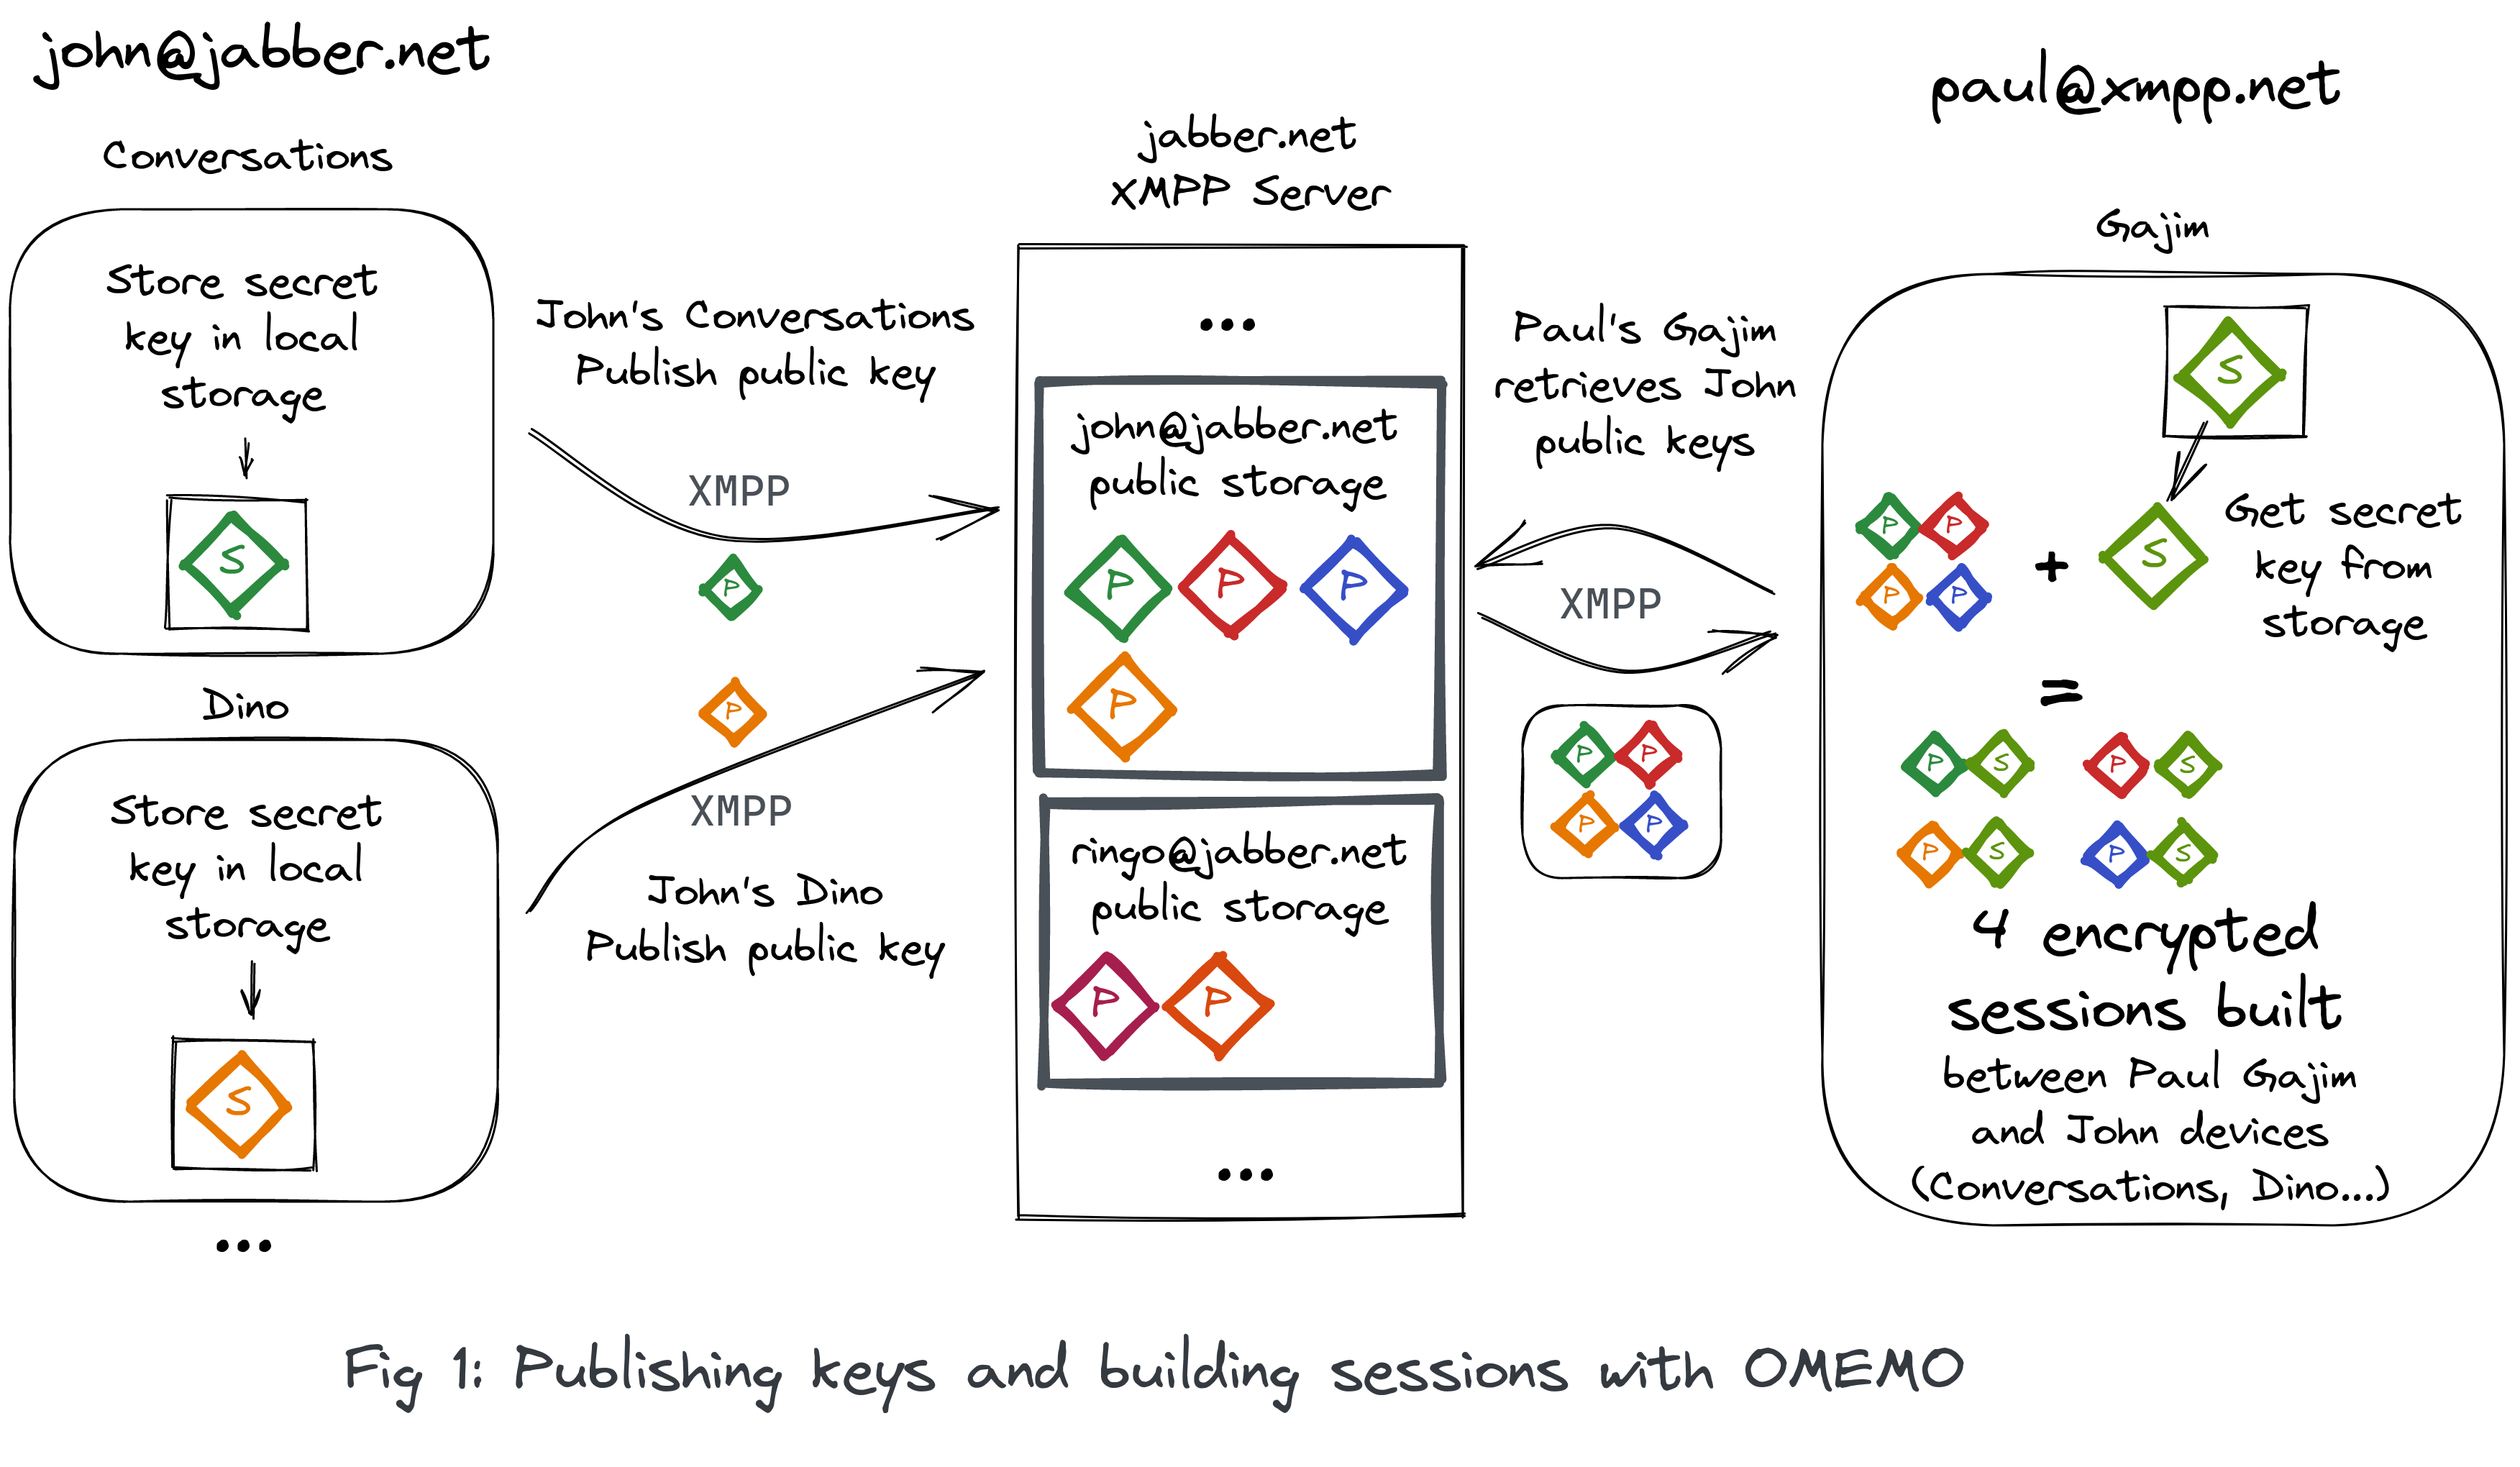 Publishing keys and building sessions with OMEMO